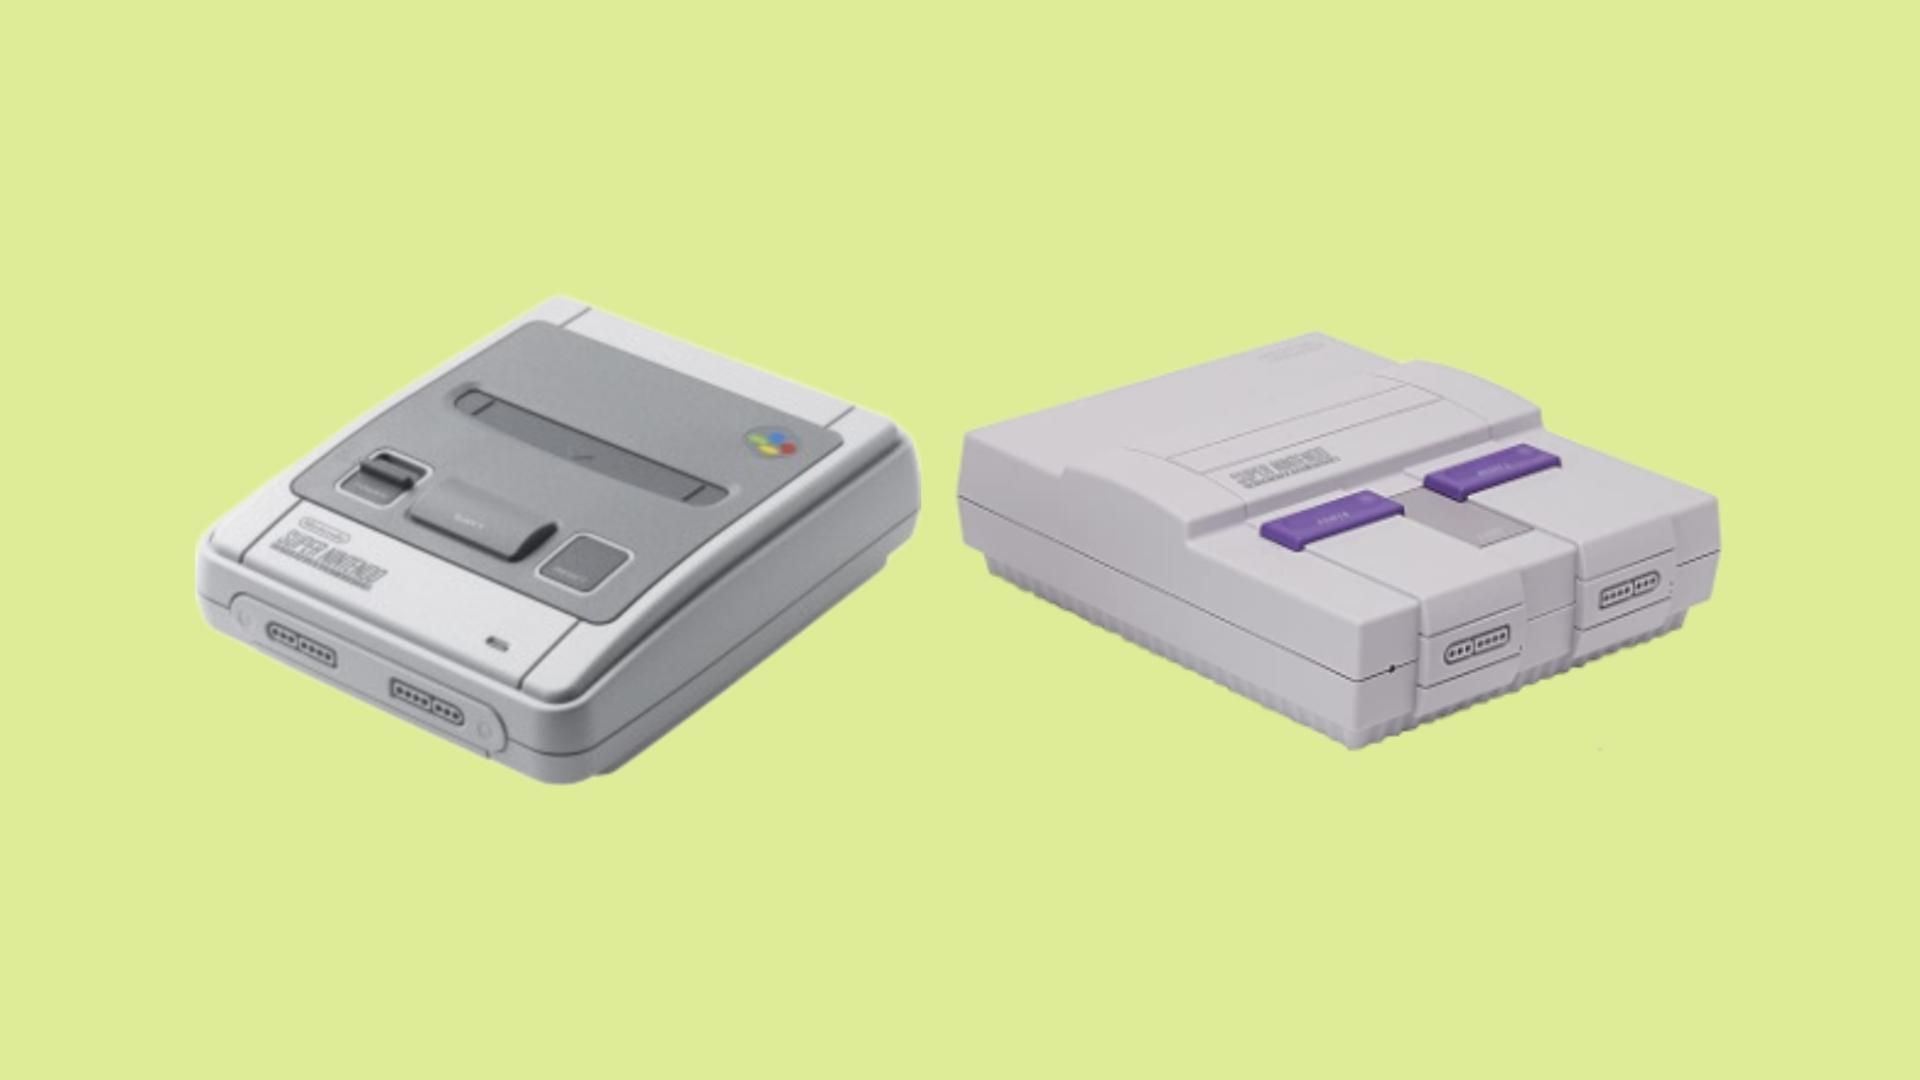 Best retro game consoles in 2023: Nintendo, PlayStation & more